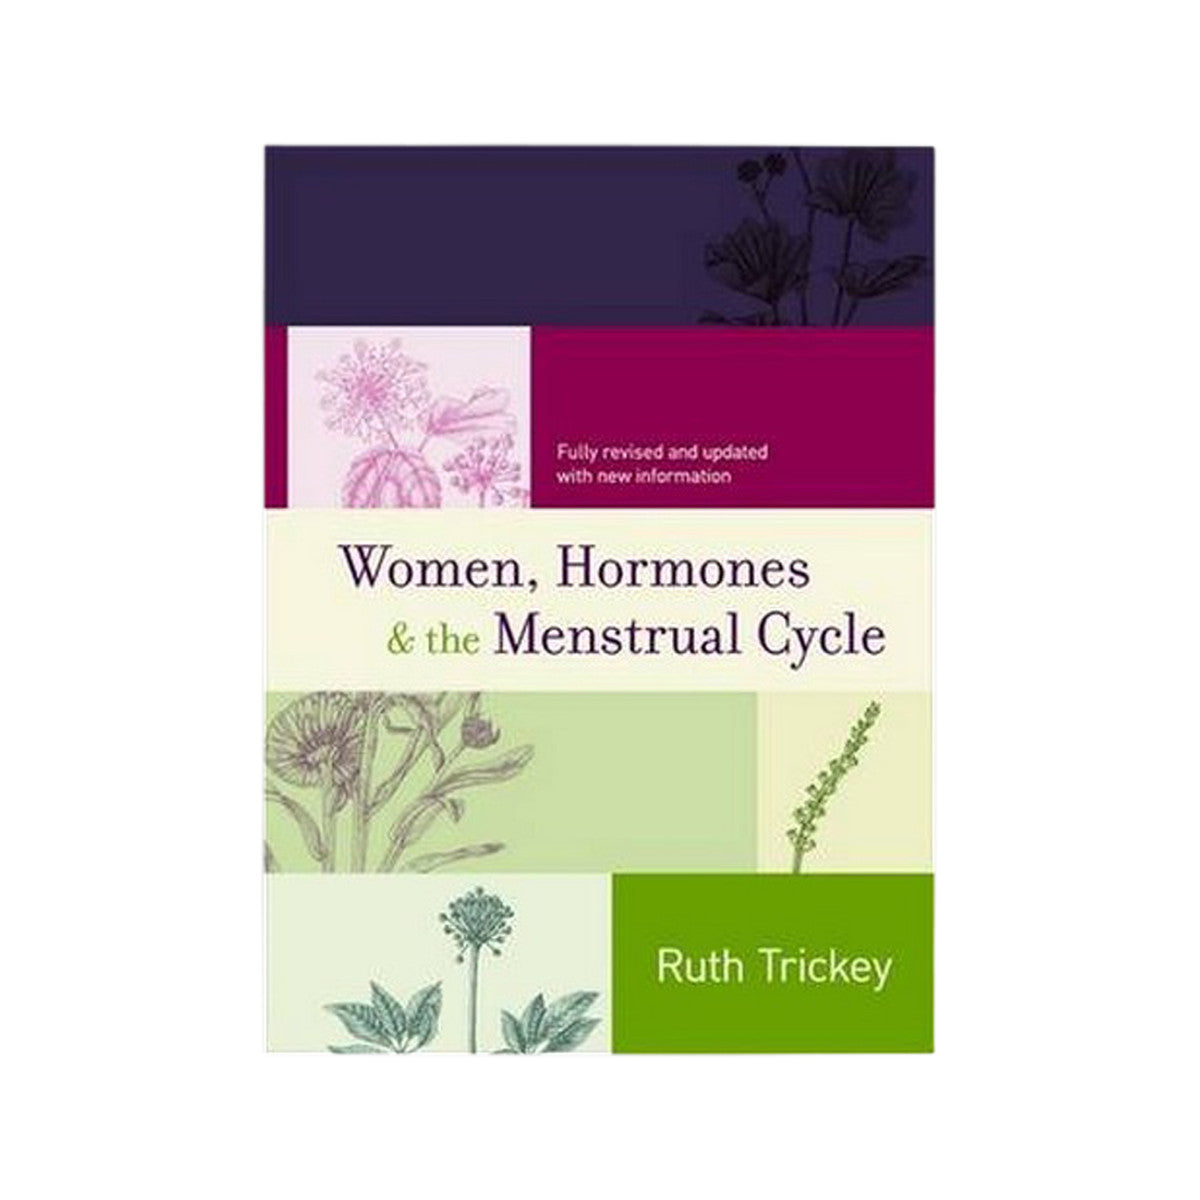 Women, Hormones and the Menstrual Cycle (Revised & Updated) by Ruth Trickey